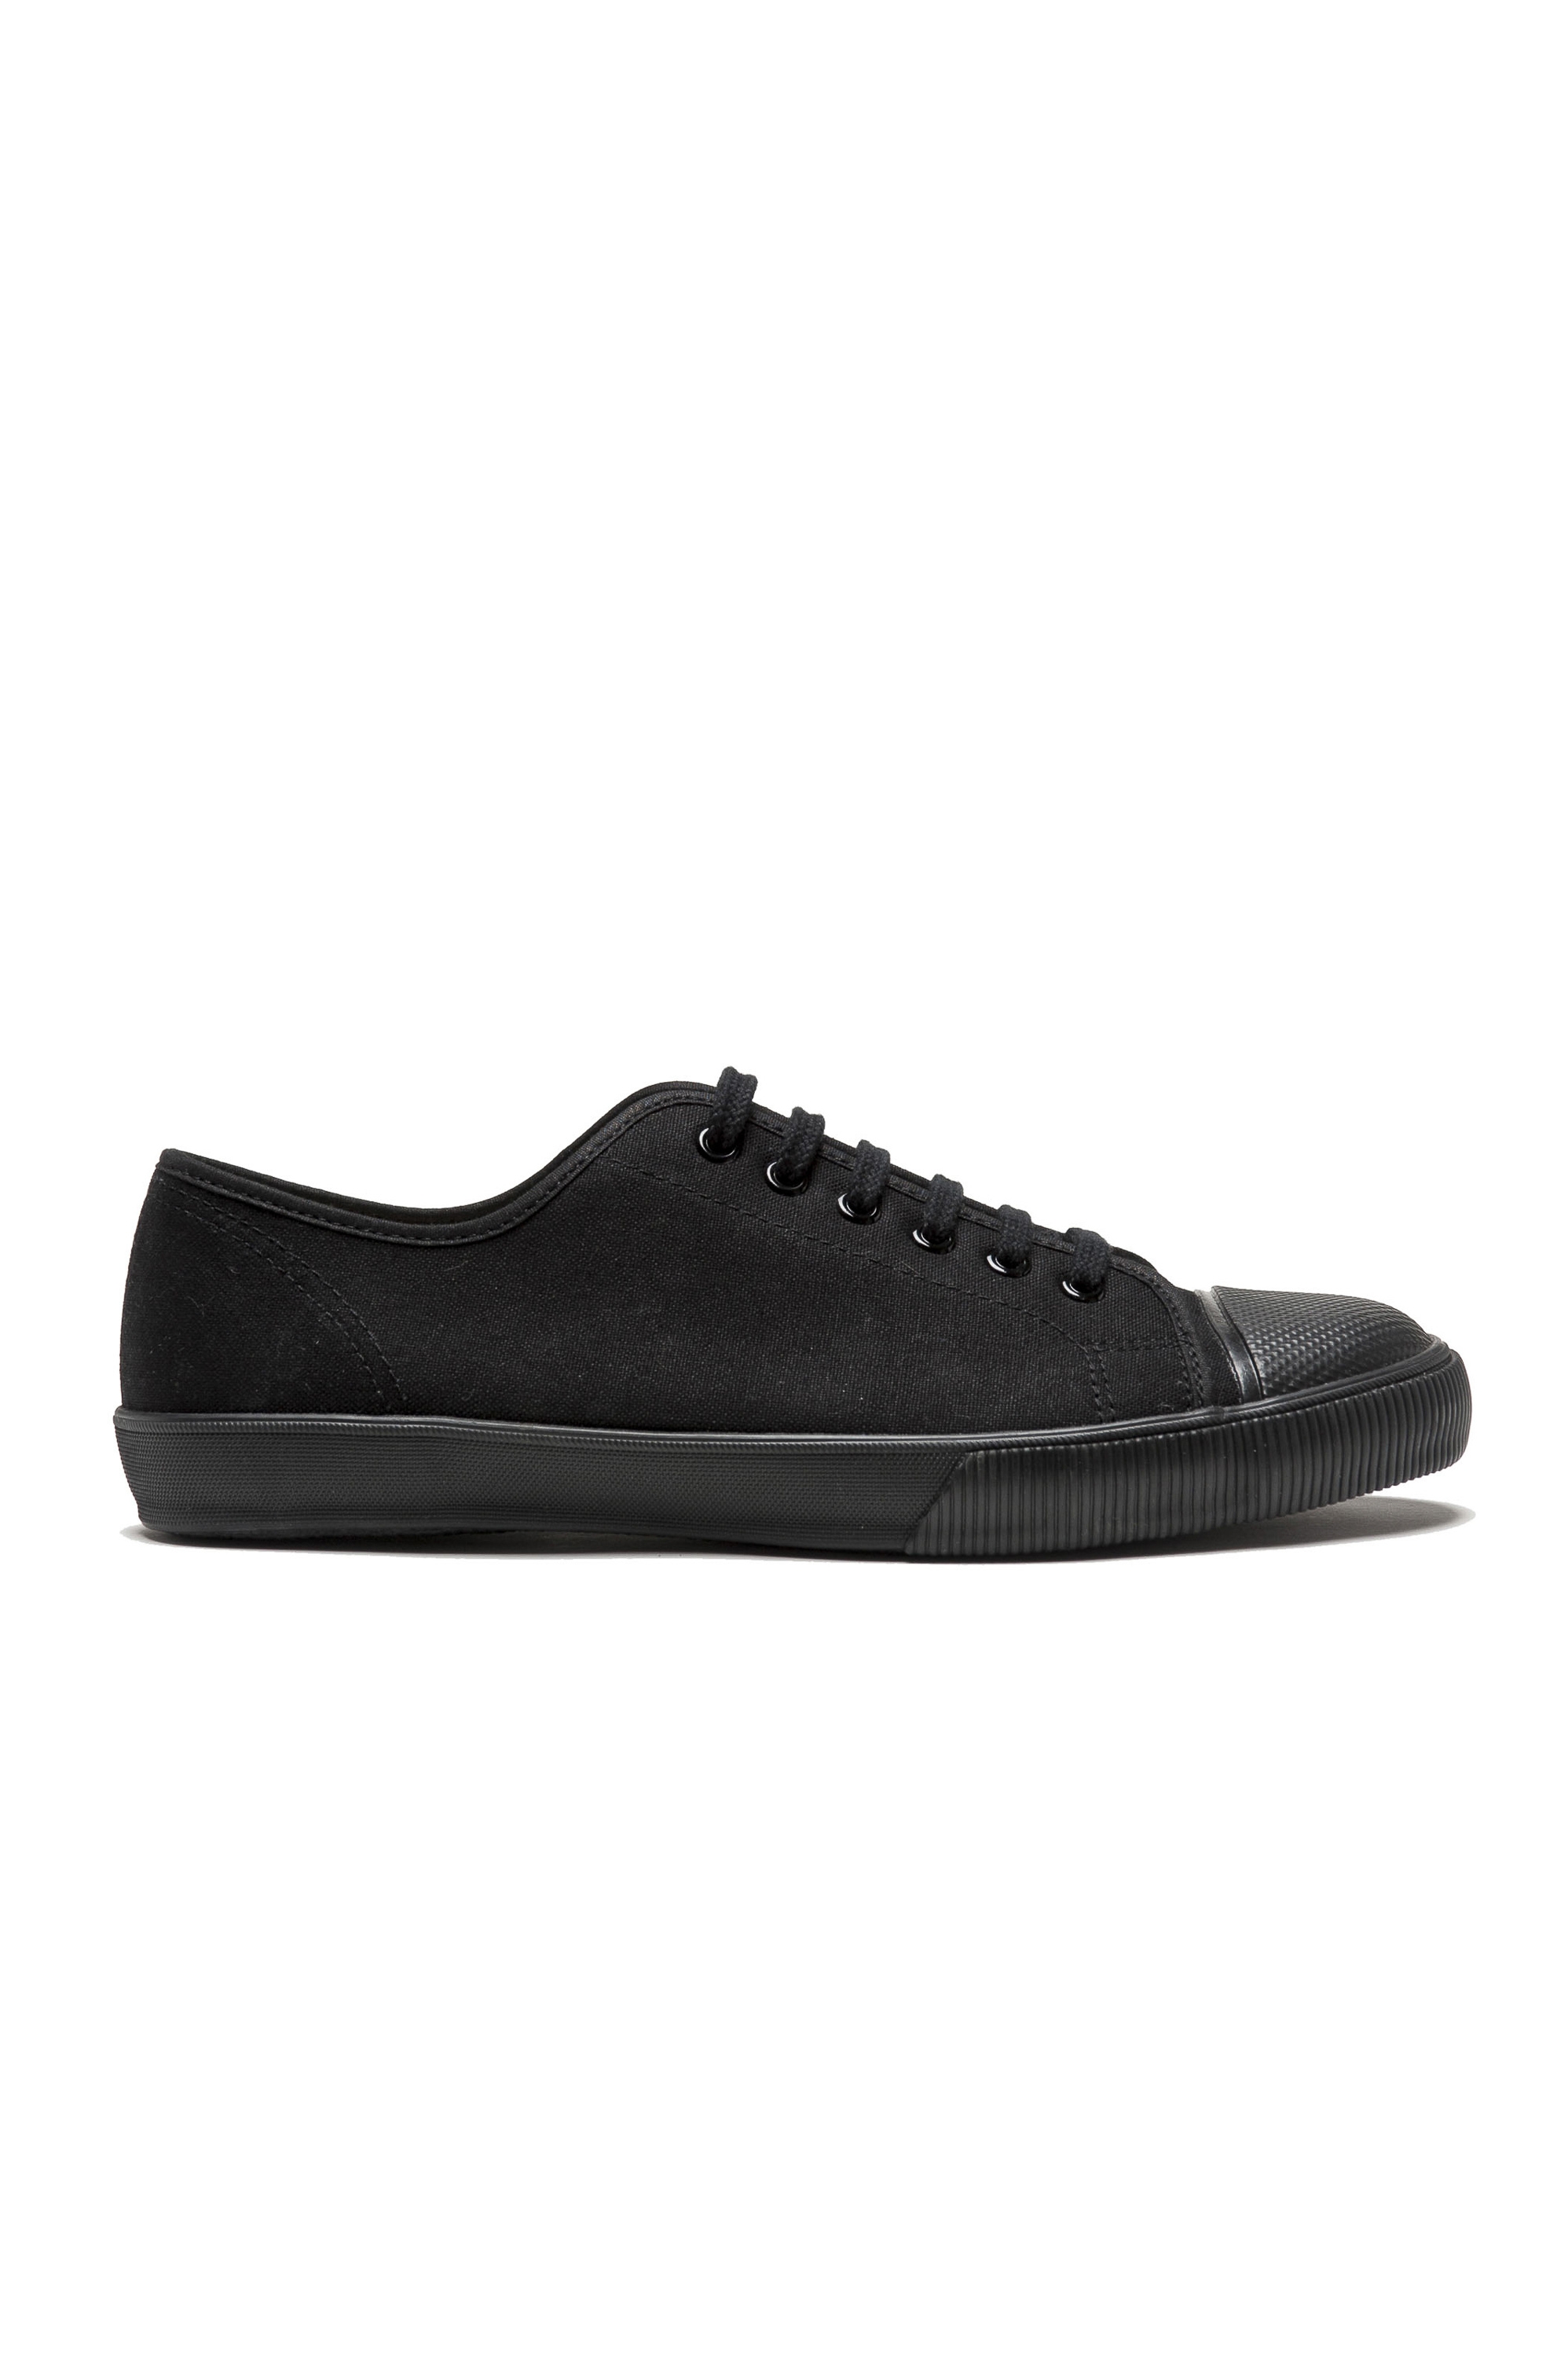 SBU 01532_2020SS Classic lace up sneakers in in black cotton canvas 01